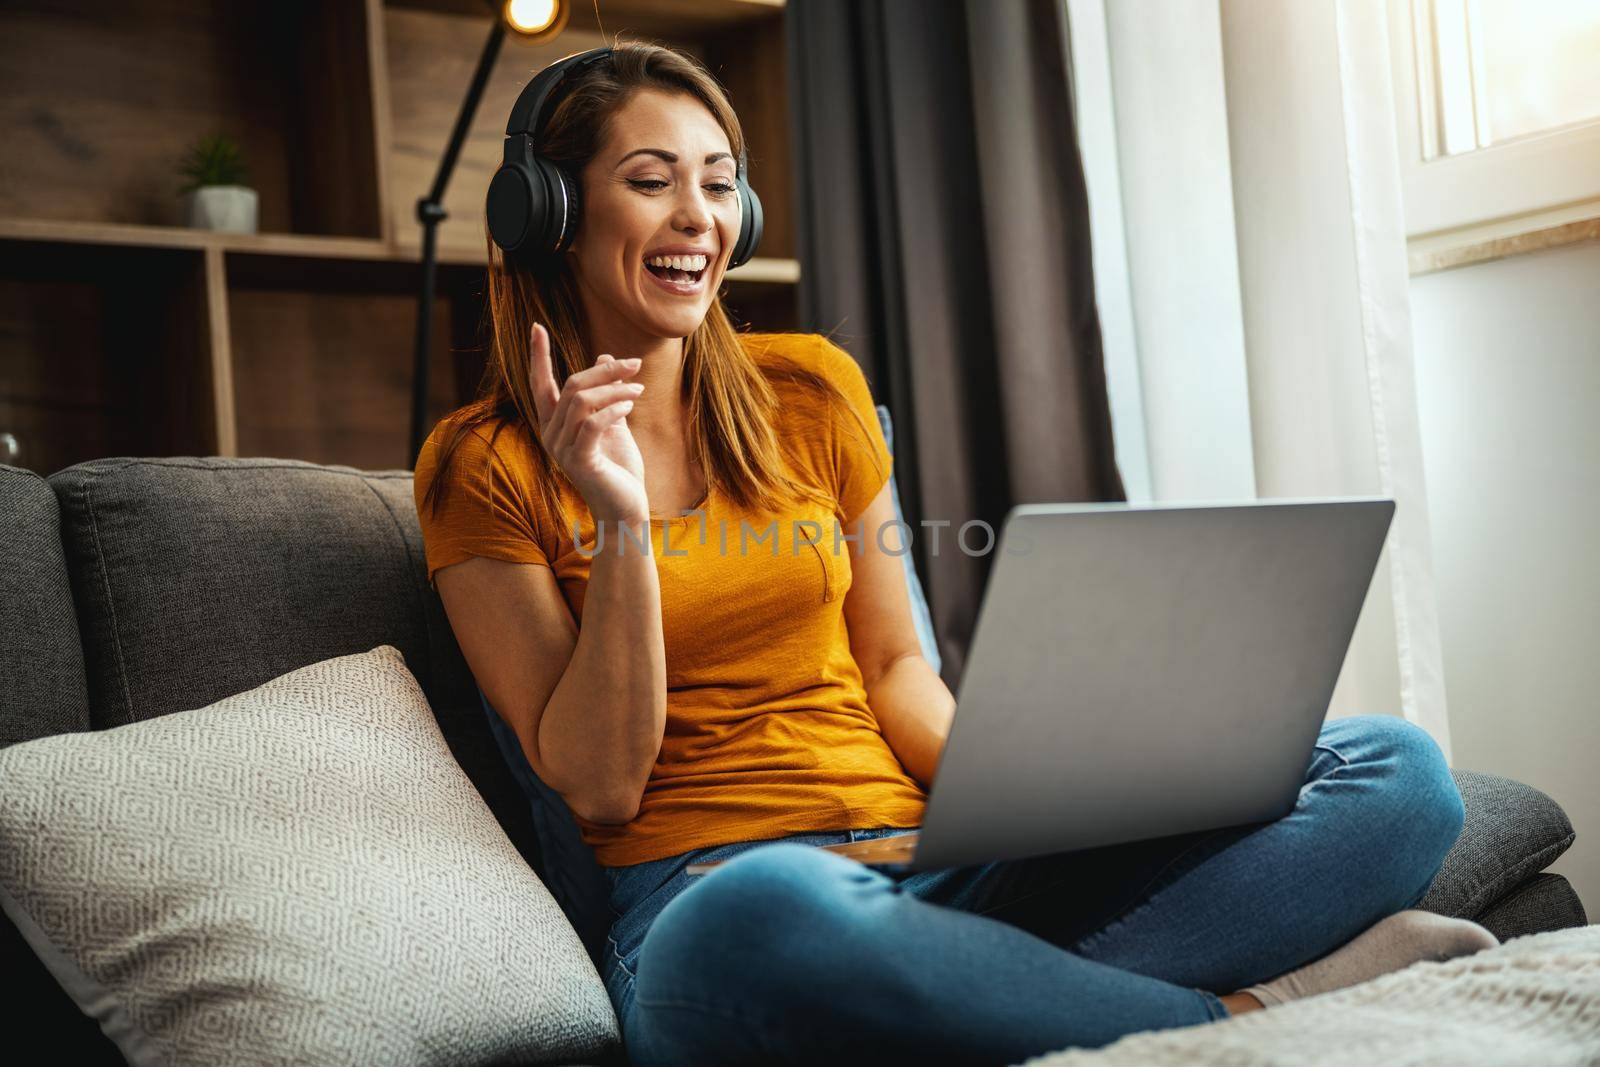 Attractive young woman sitting cross legged on the sofa and using her laptop and headphones to make a video call with someone at home.